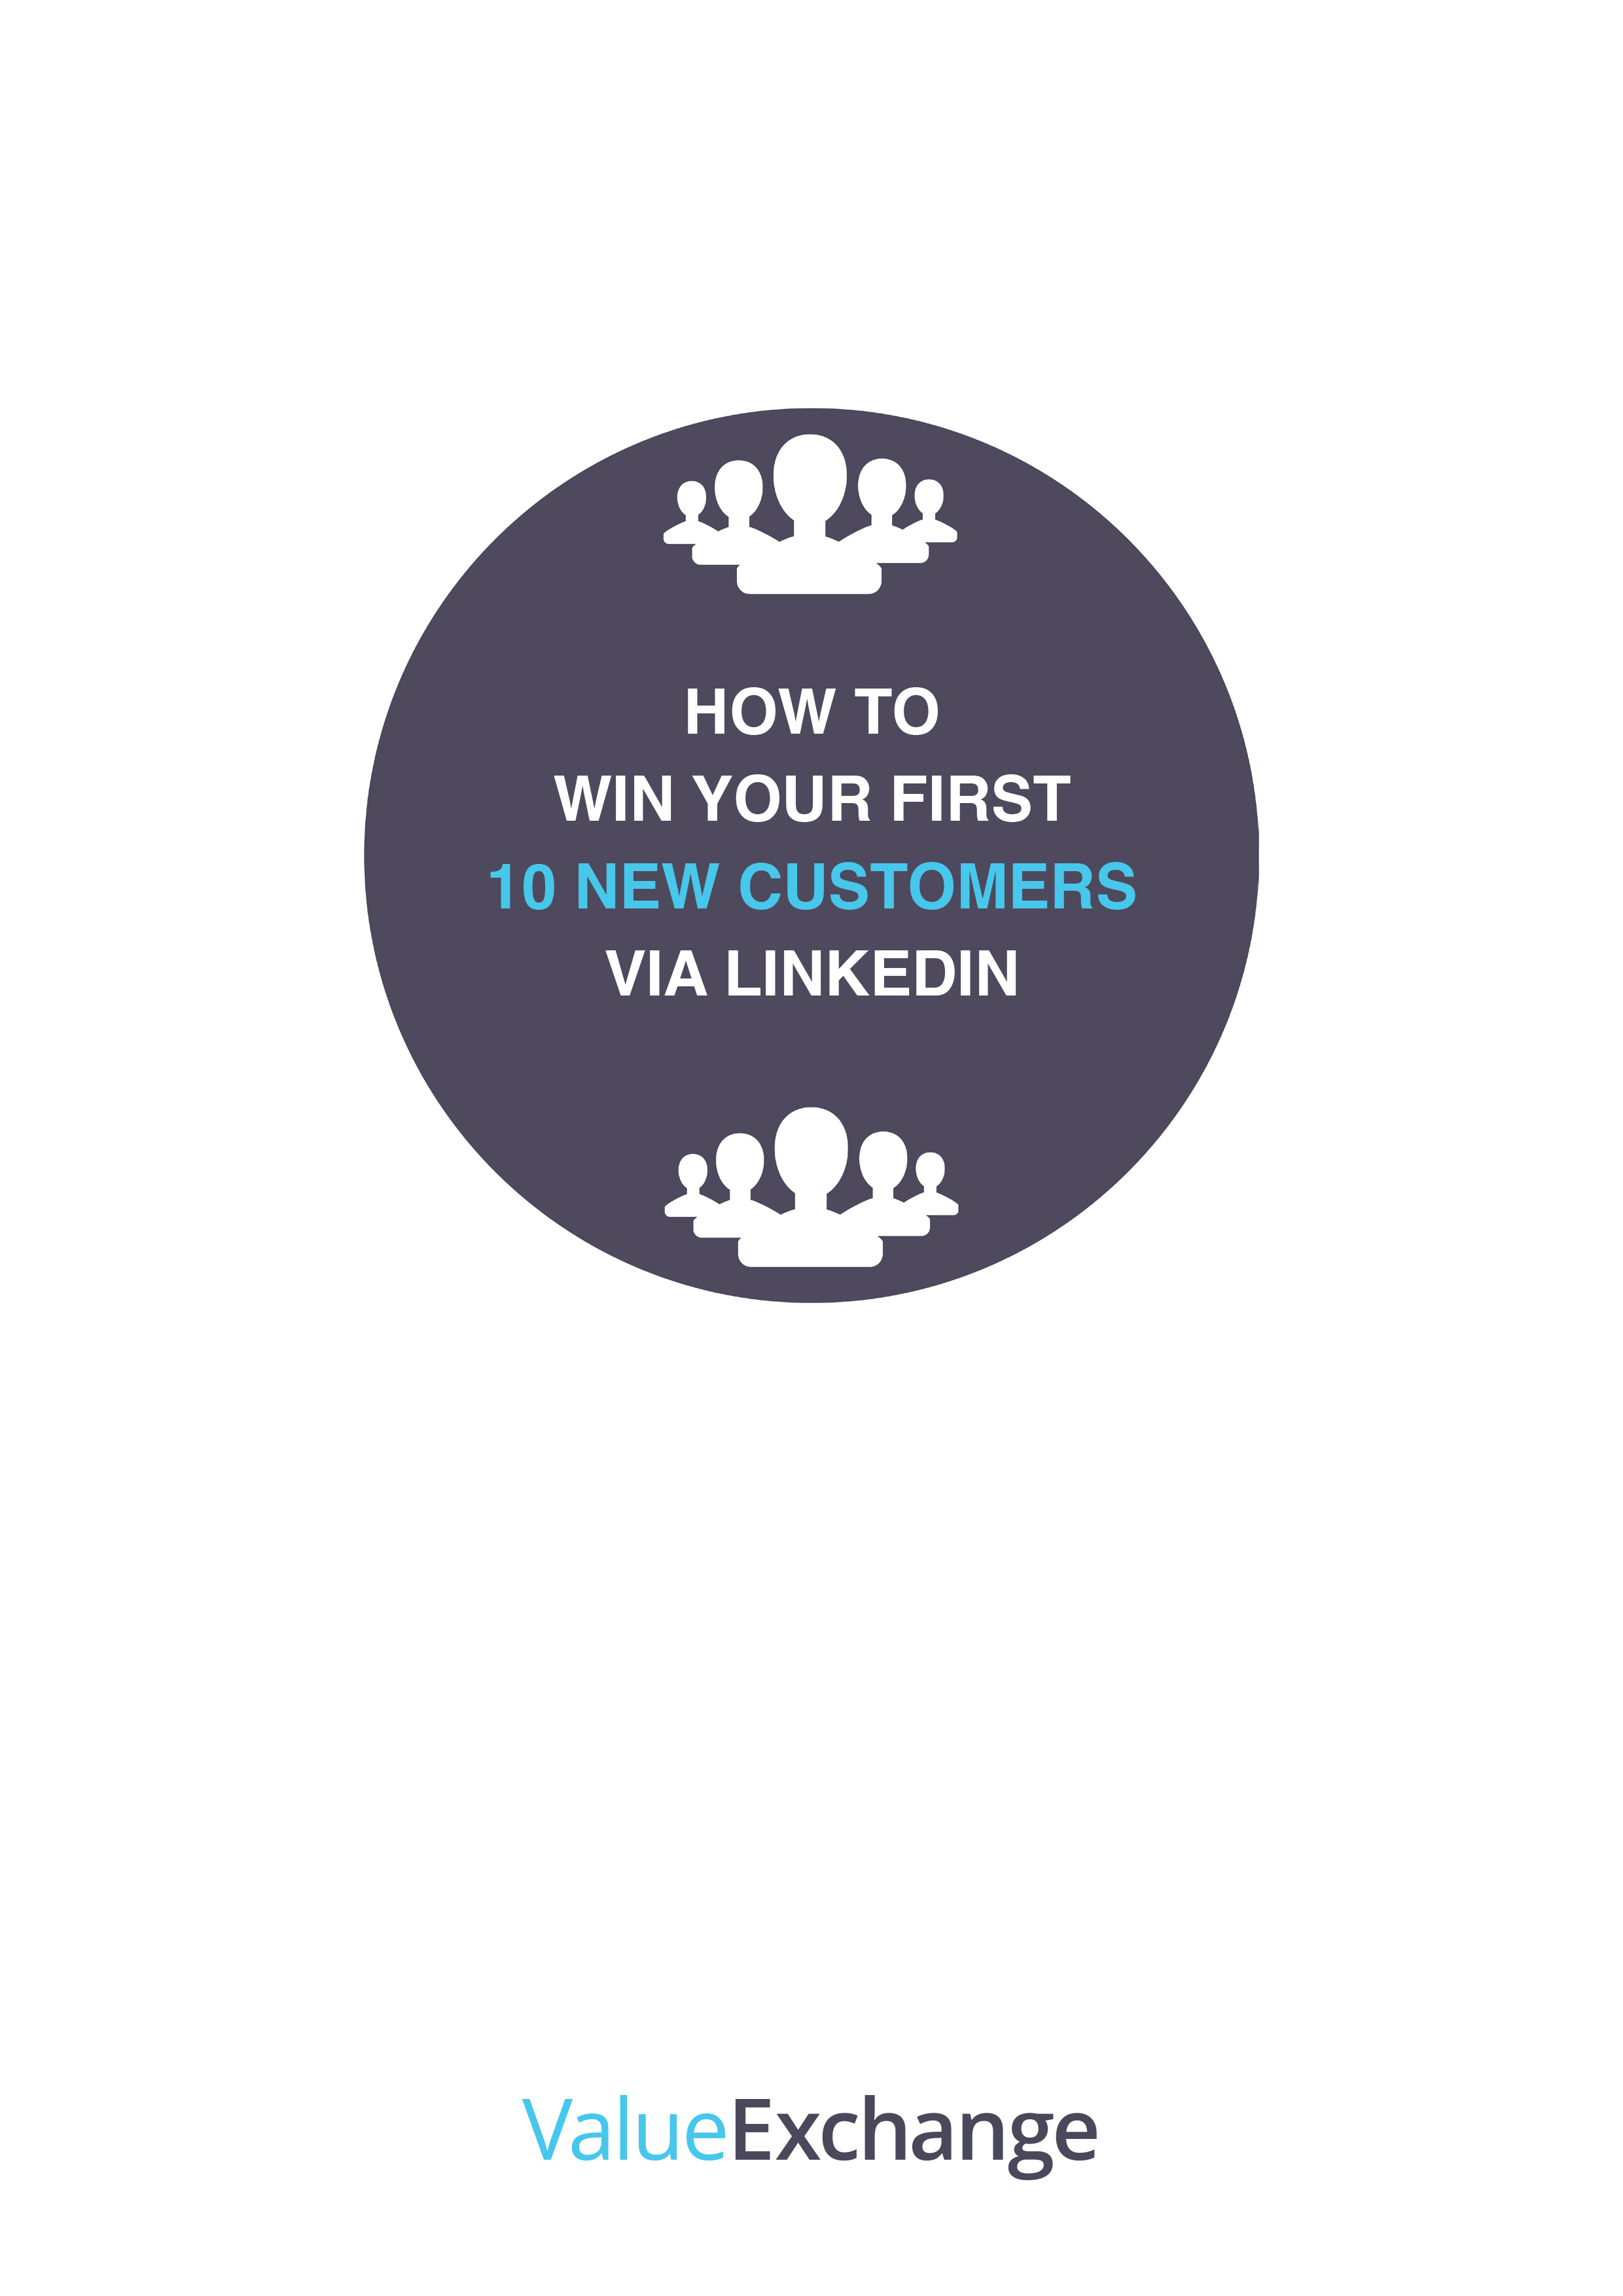 How to Win Your First Ten New Customers Via LinkedIn Resource by Nigel Cliffe